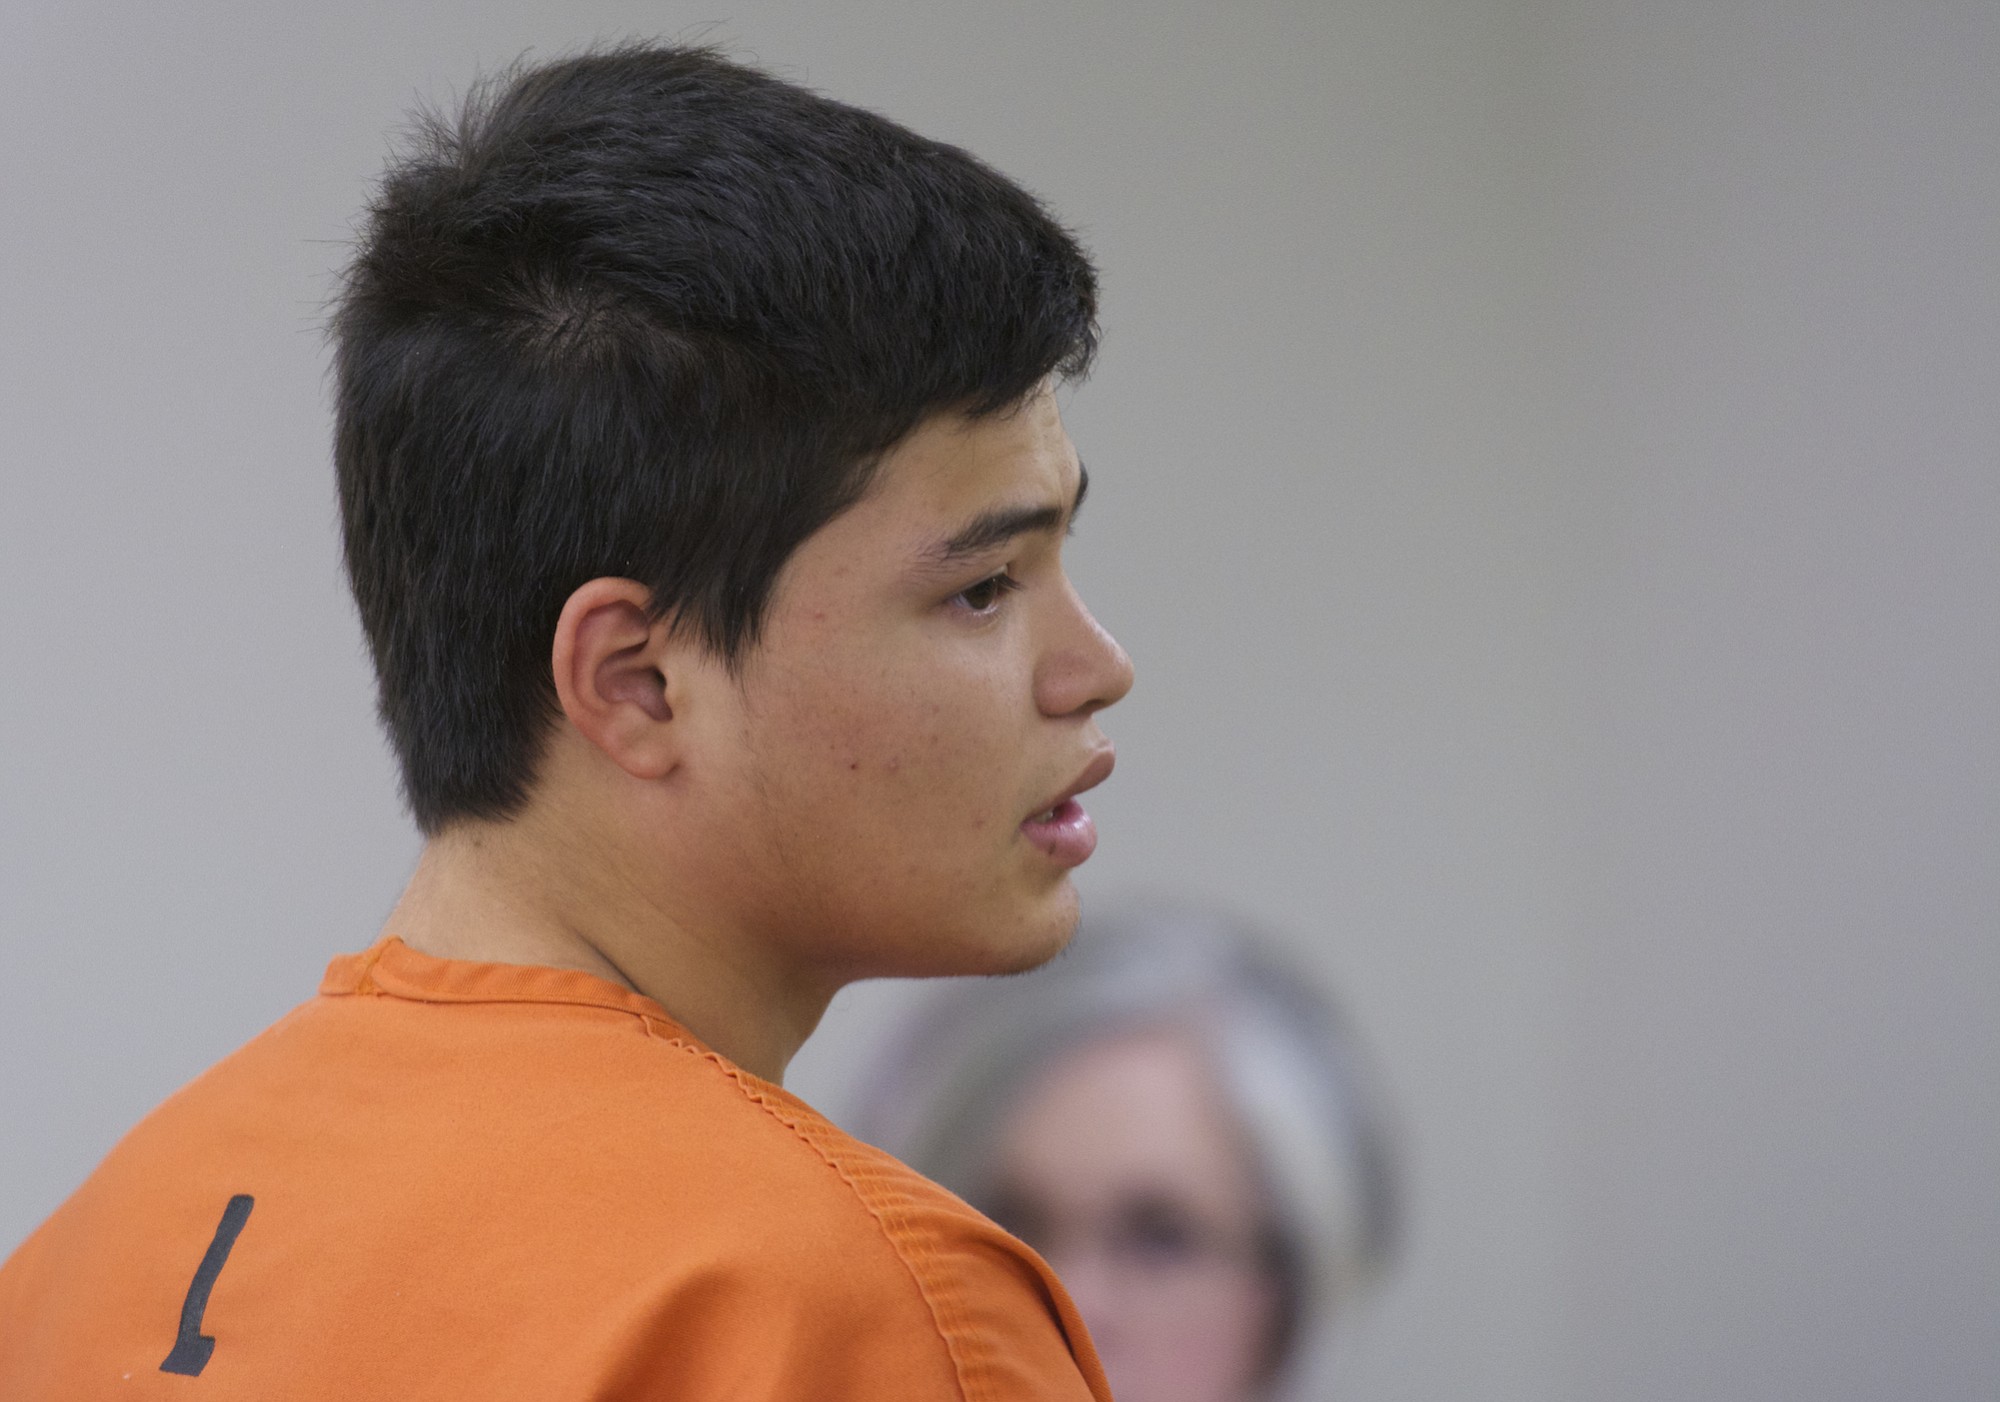 Andrew Perez-Garcia, 18, of Vancouver appears in Clark County Superior Court today on suspicion of first-degree arson in connection with a July 5 fireworks fire in Felida.